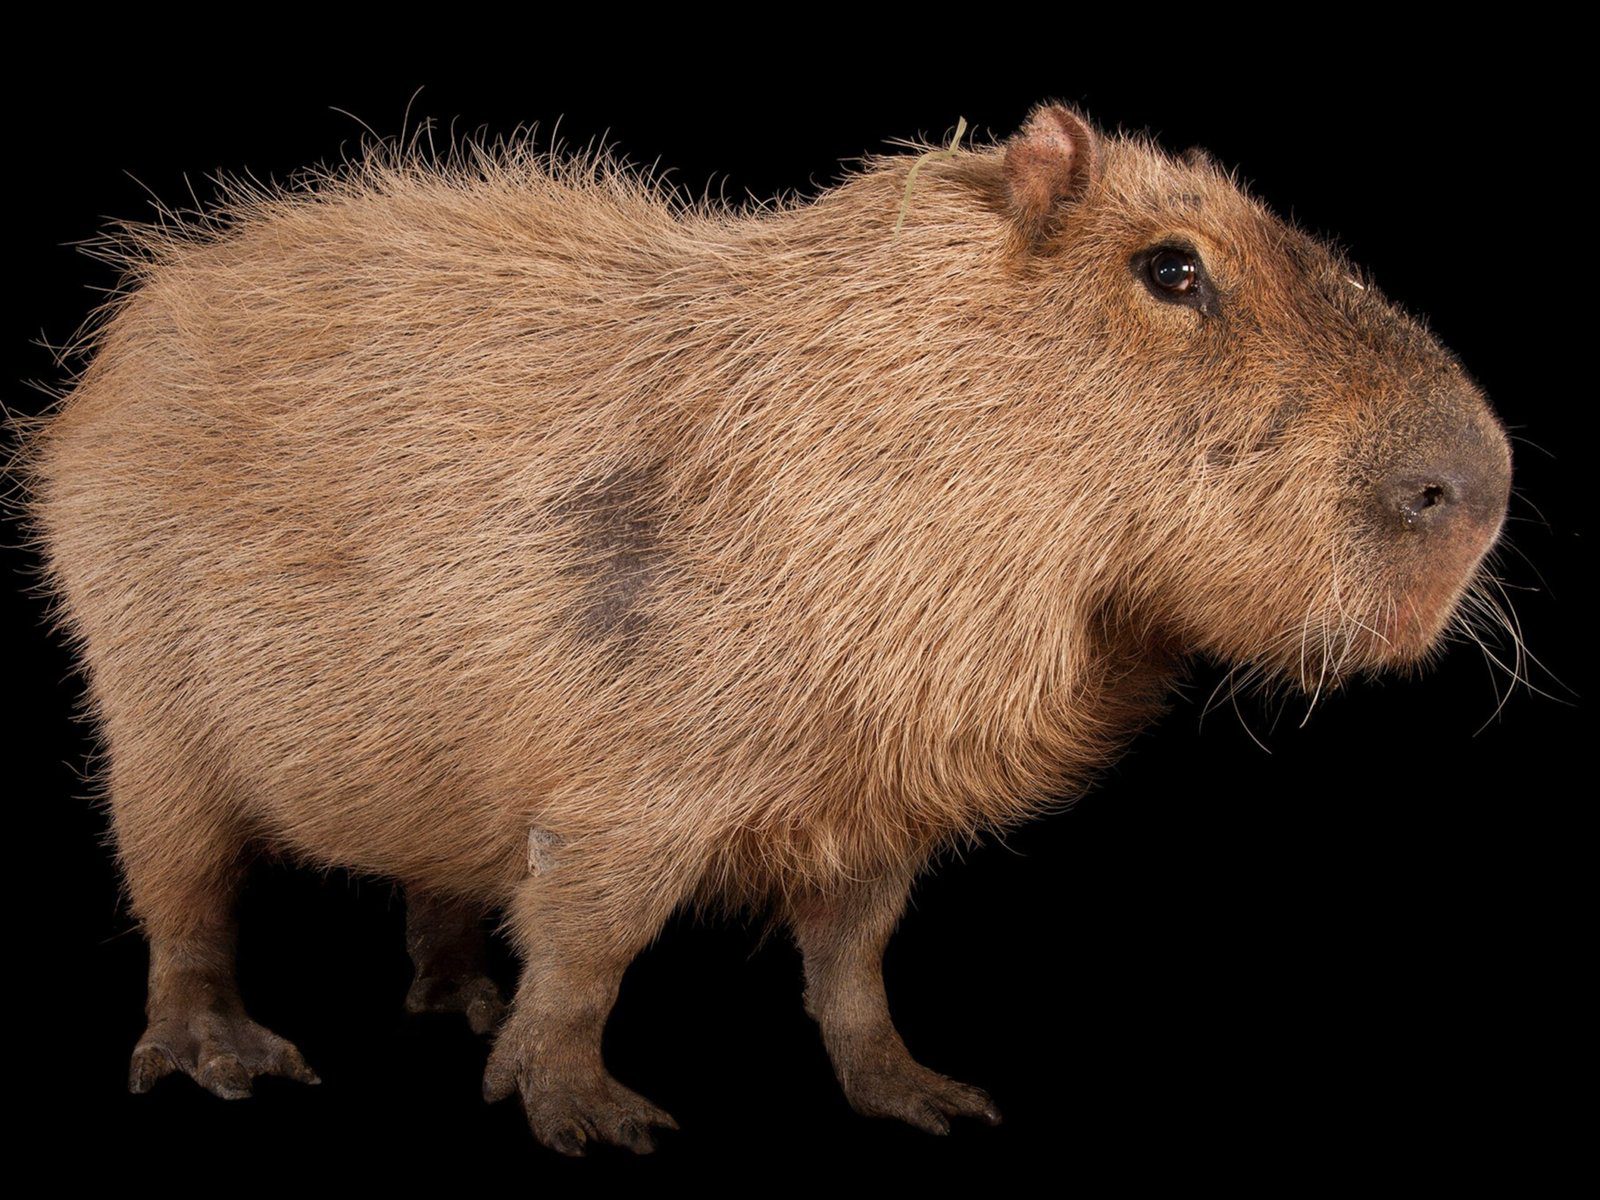 The Current Population of Capybaras